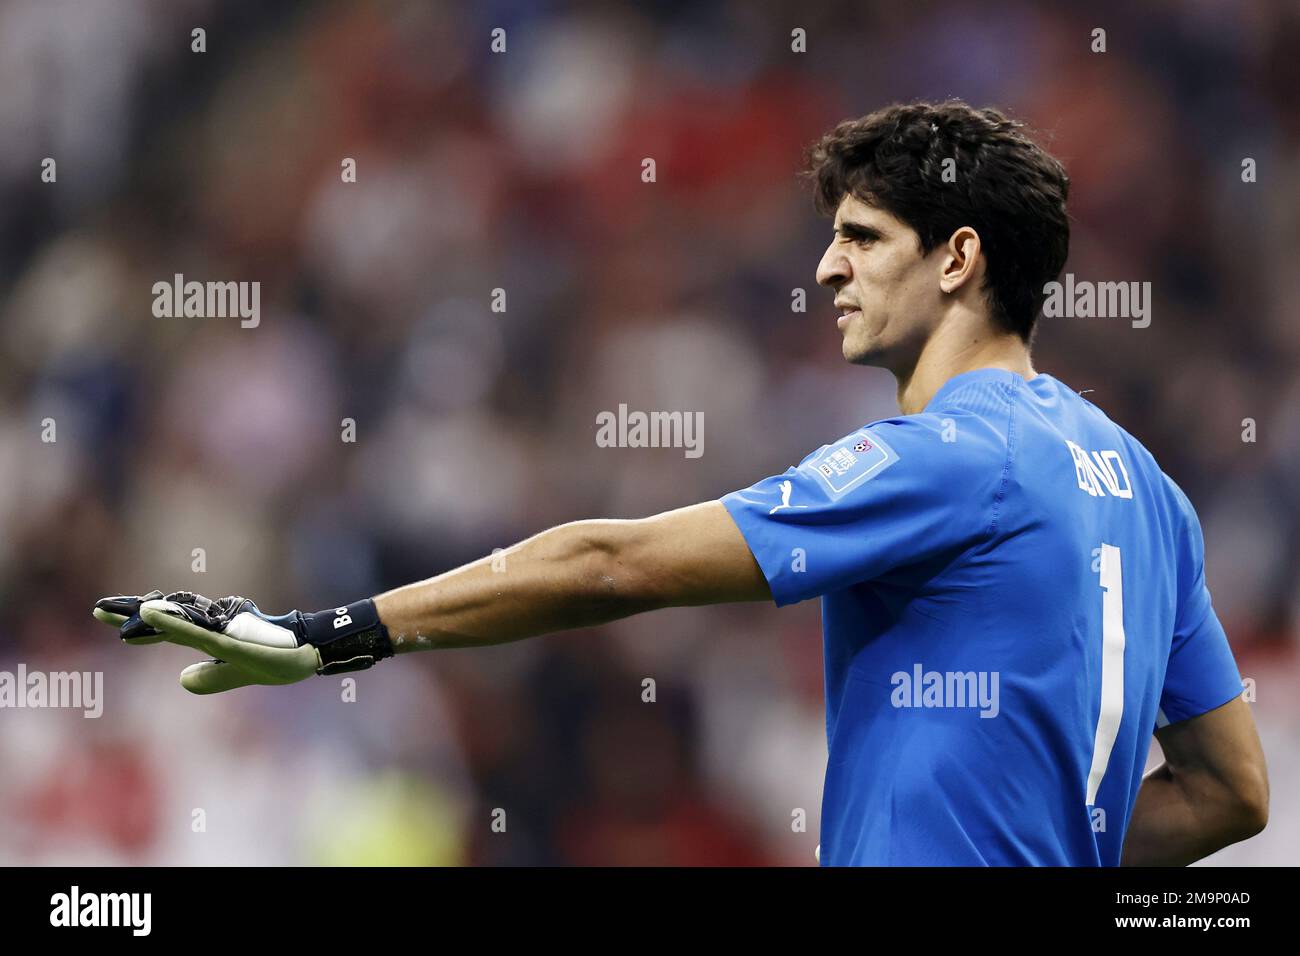 AL KHOR - Morocco goalkeeper Yassine Bounou during the FIFA World Cup Qatar 2022 Semifinal match between France and Morocco at Al Bayt Stadium on December 14, 2022 in Al Khor, Qatar. AP | Dutch Height | MAURICE OF STONE Stock Photo